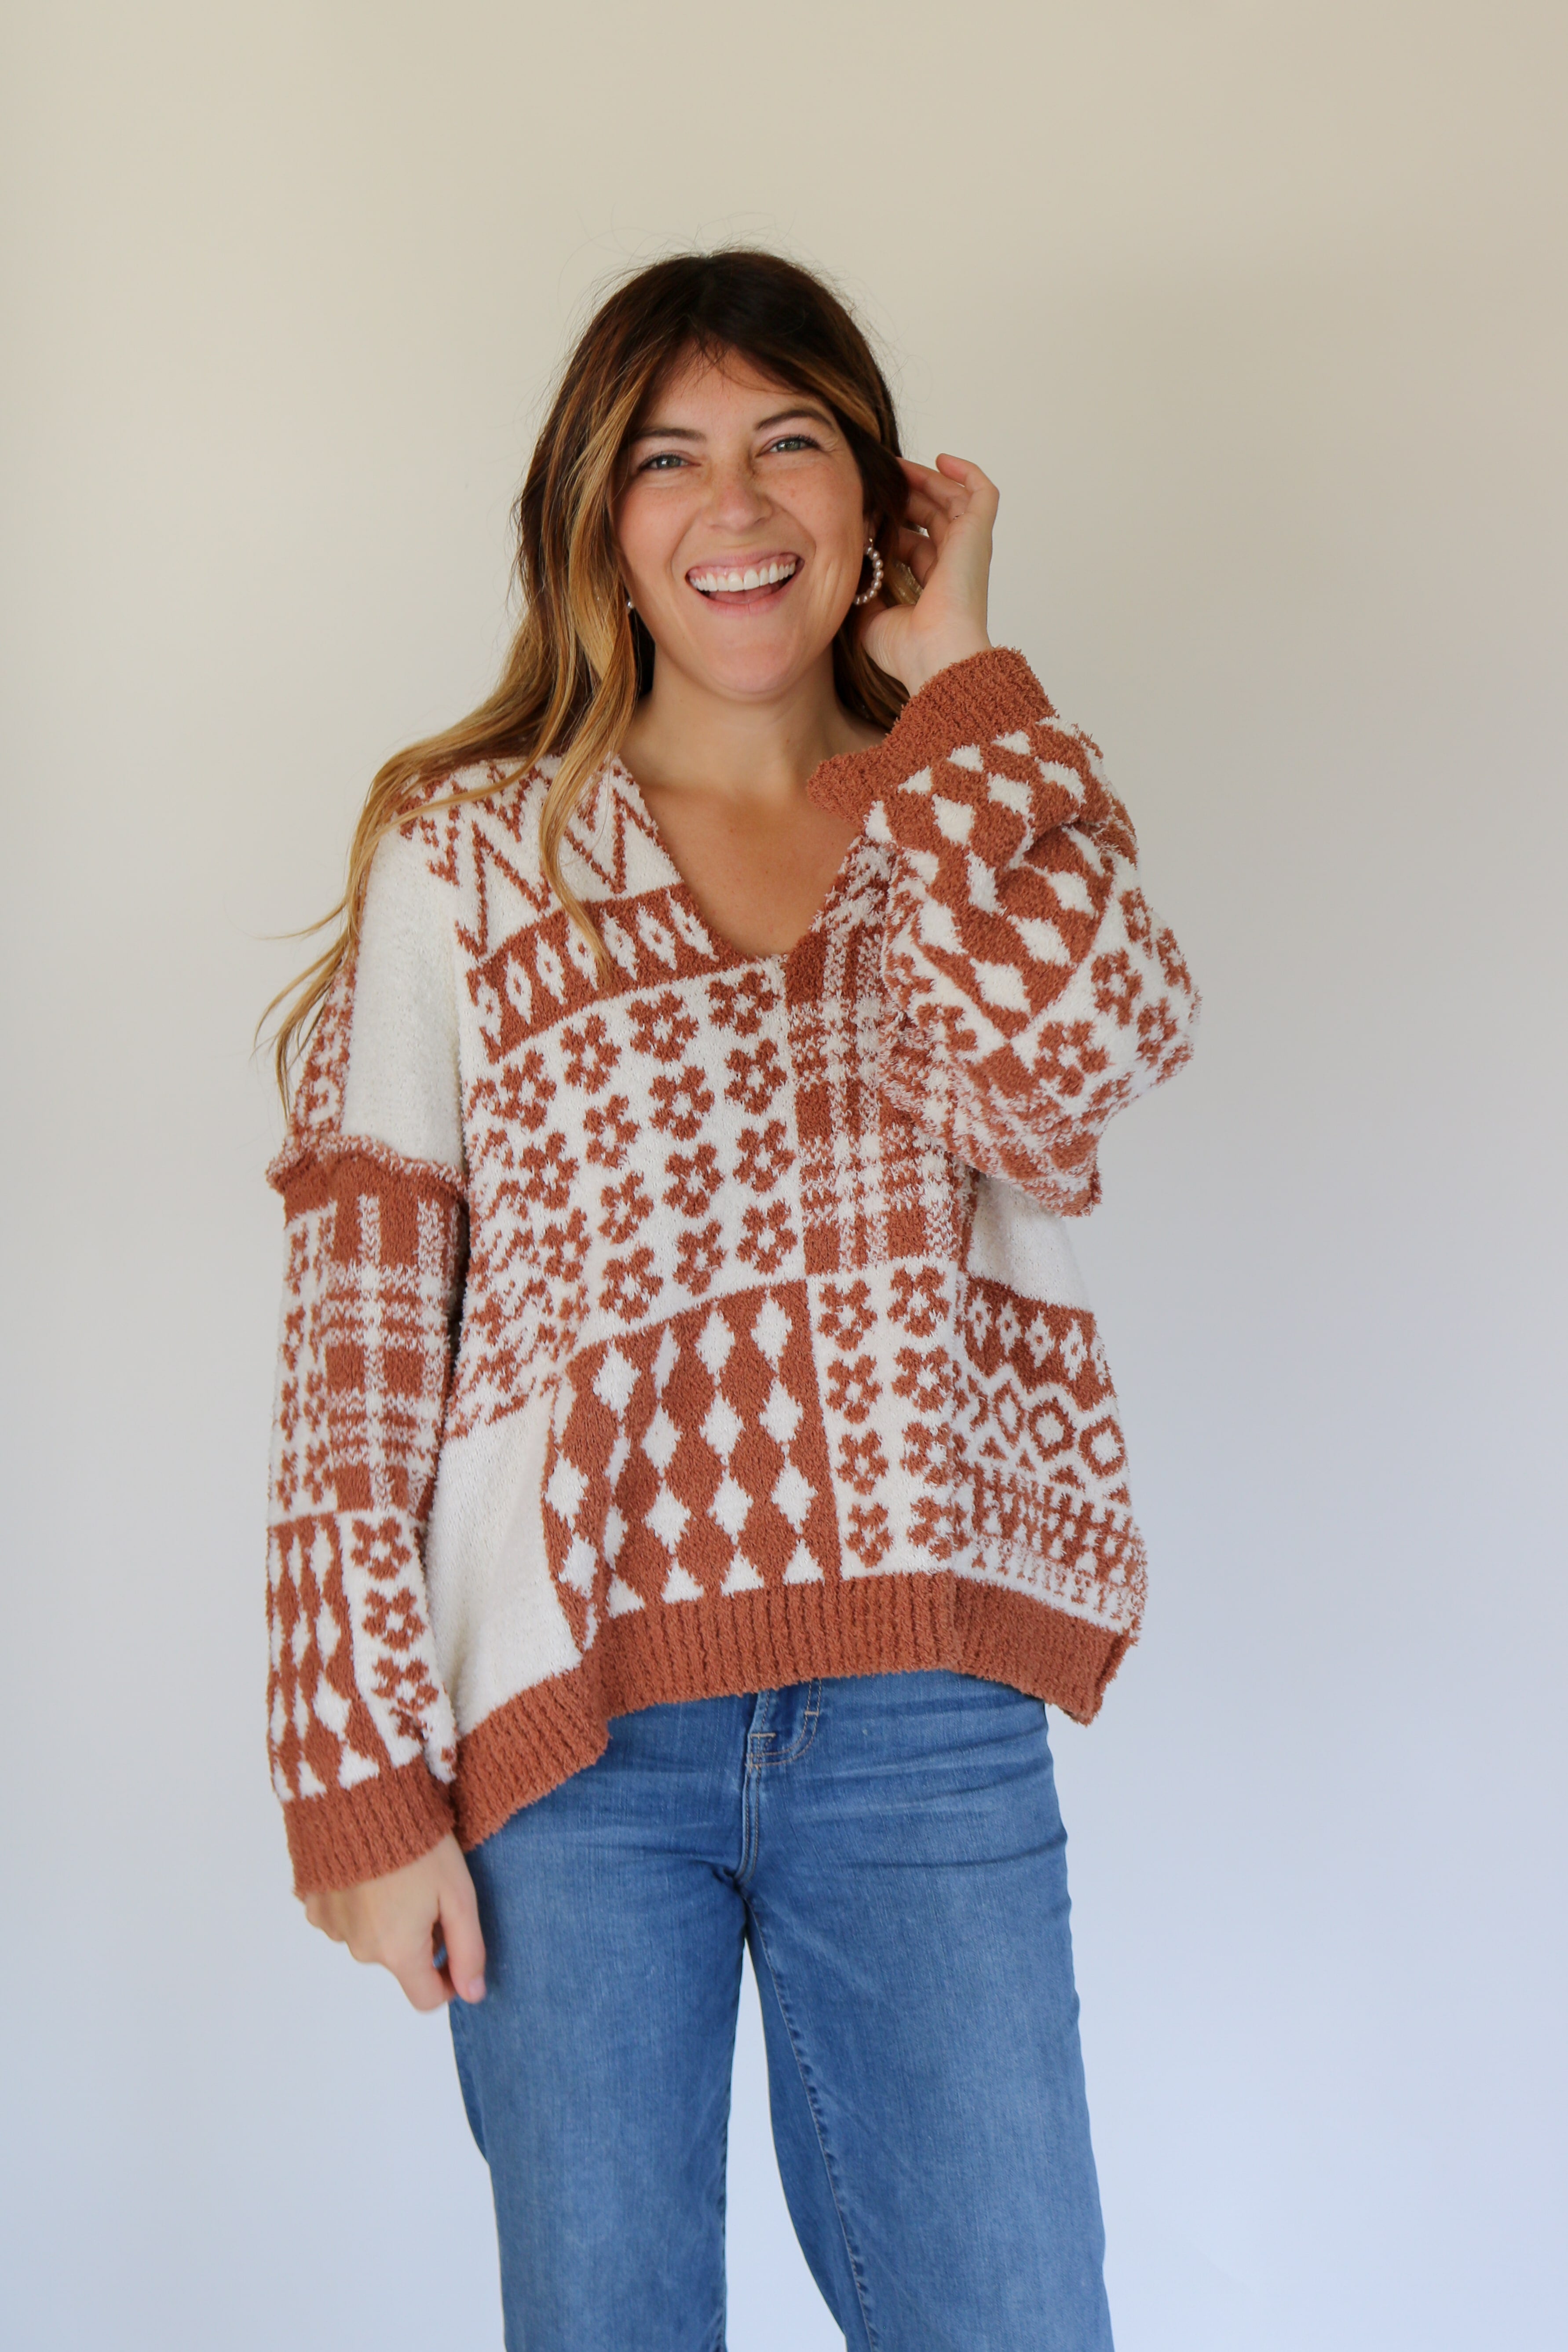 Oversized Patterned Sweater in Brown